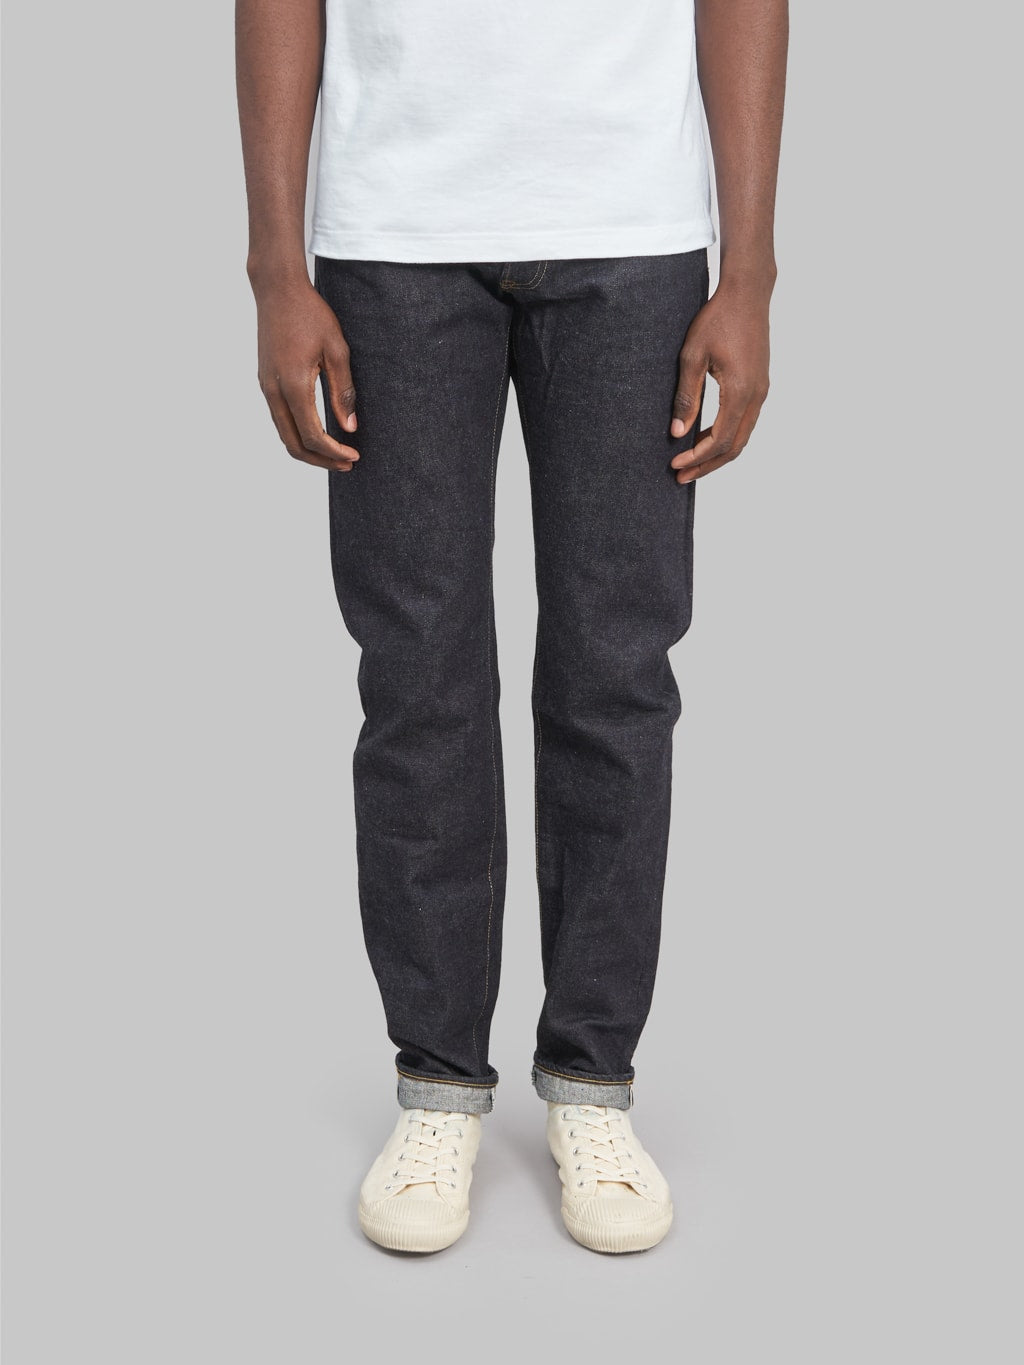 Studio D'Artisan SD-108 15oz Relaxed Tapered Jeans